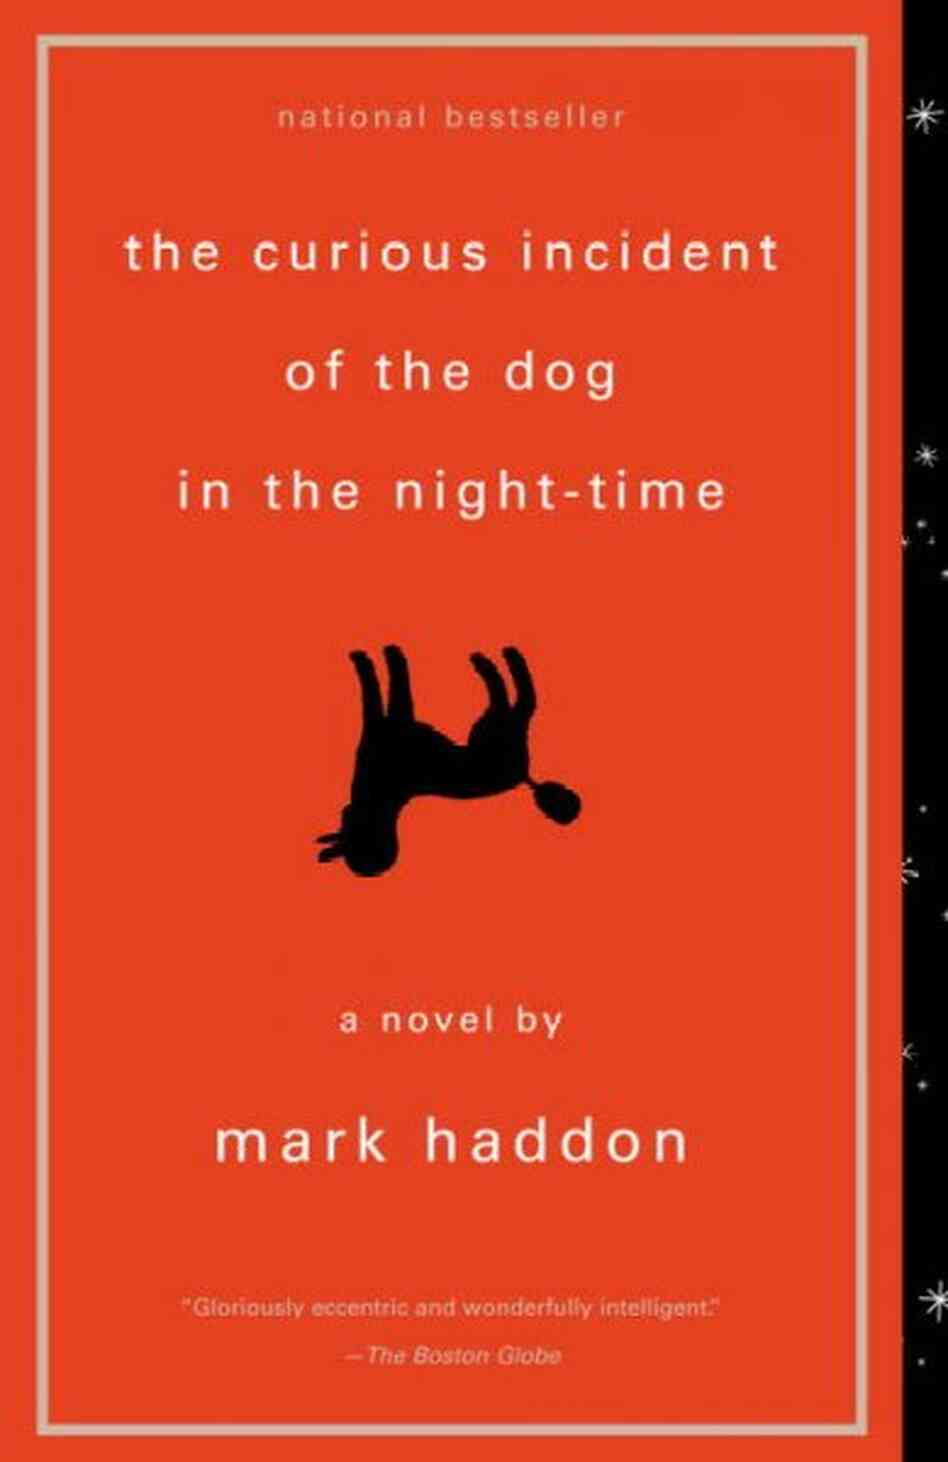 The Curious Incident of the Dog in the Nigh-Time